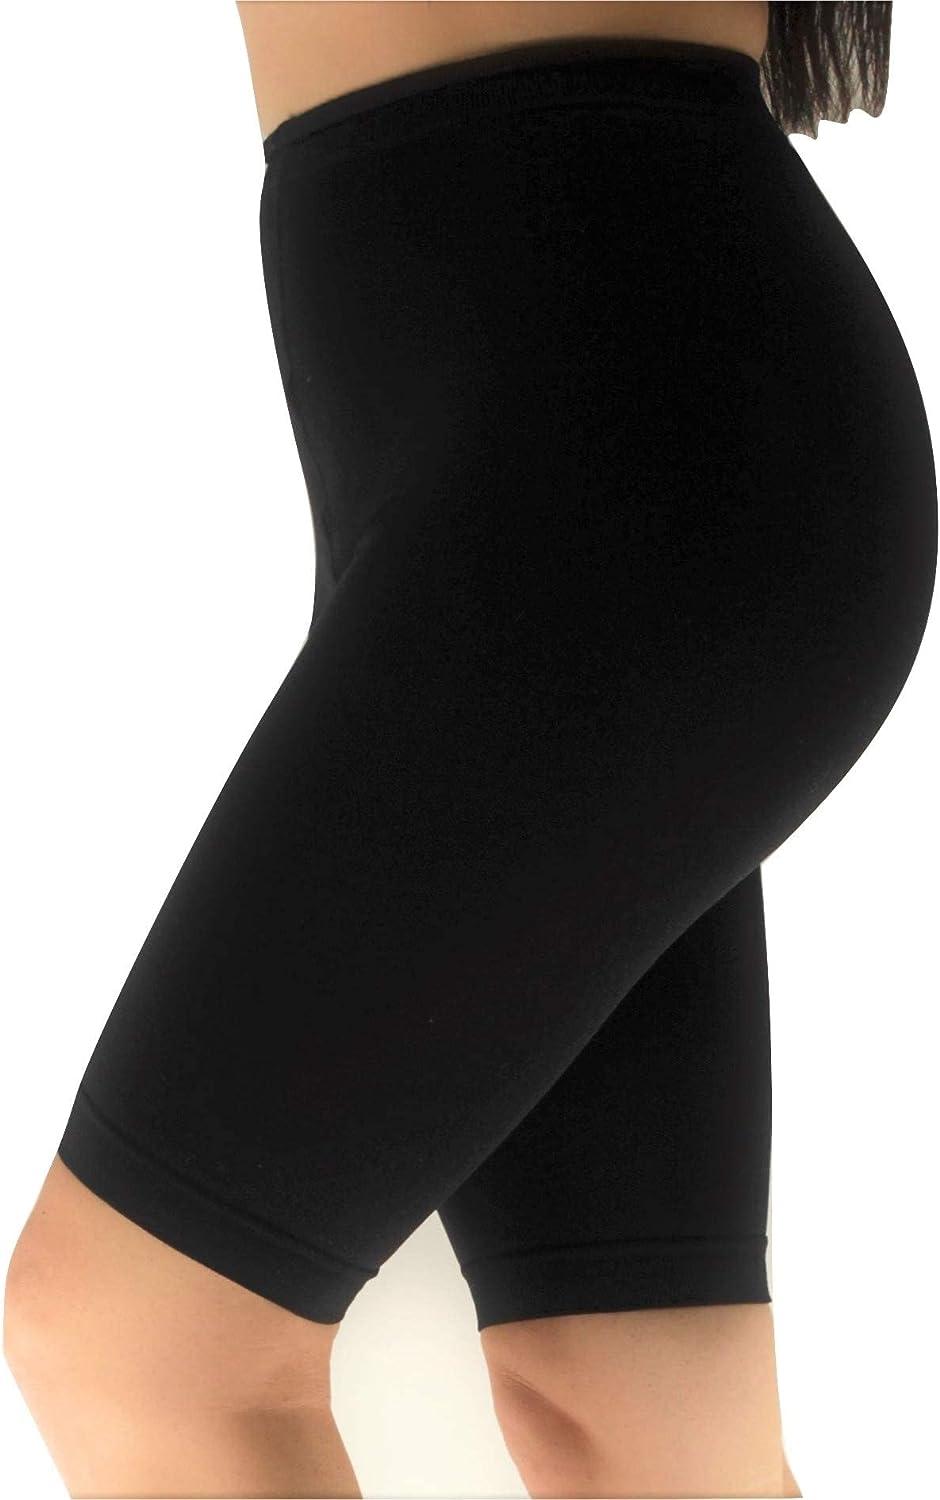 Womens Compression Tights with Open Toe 20-30mmHg for Lymphedema - Black,  XL 